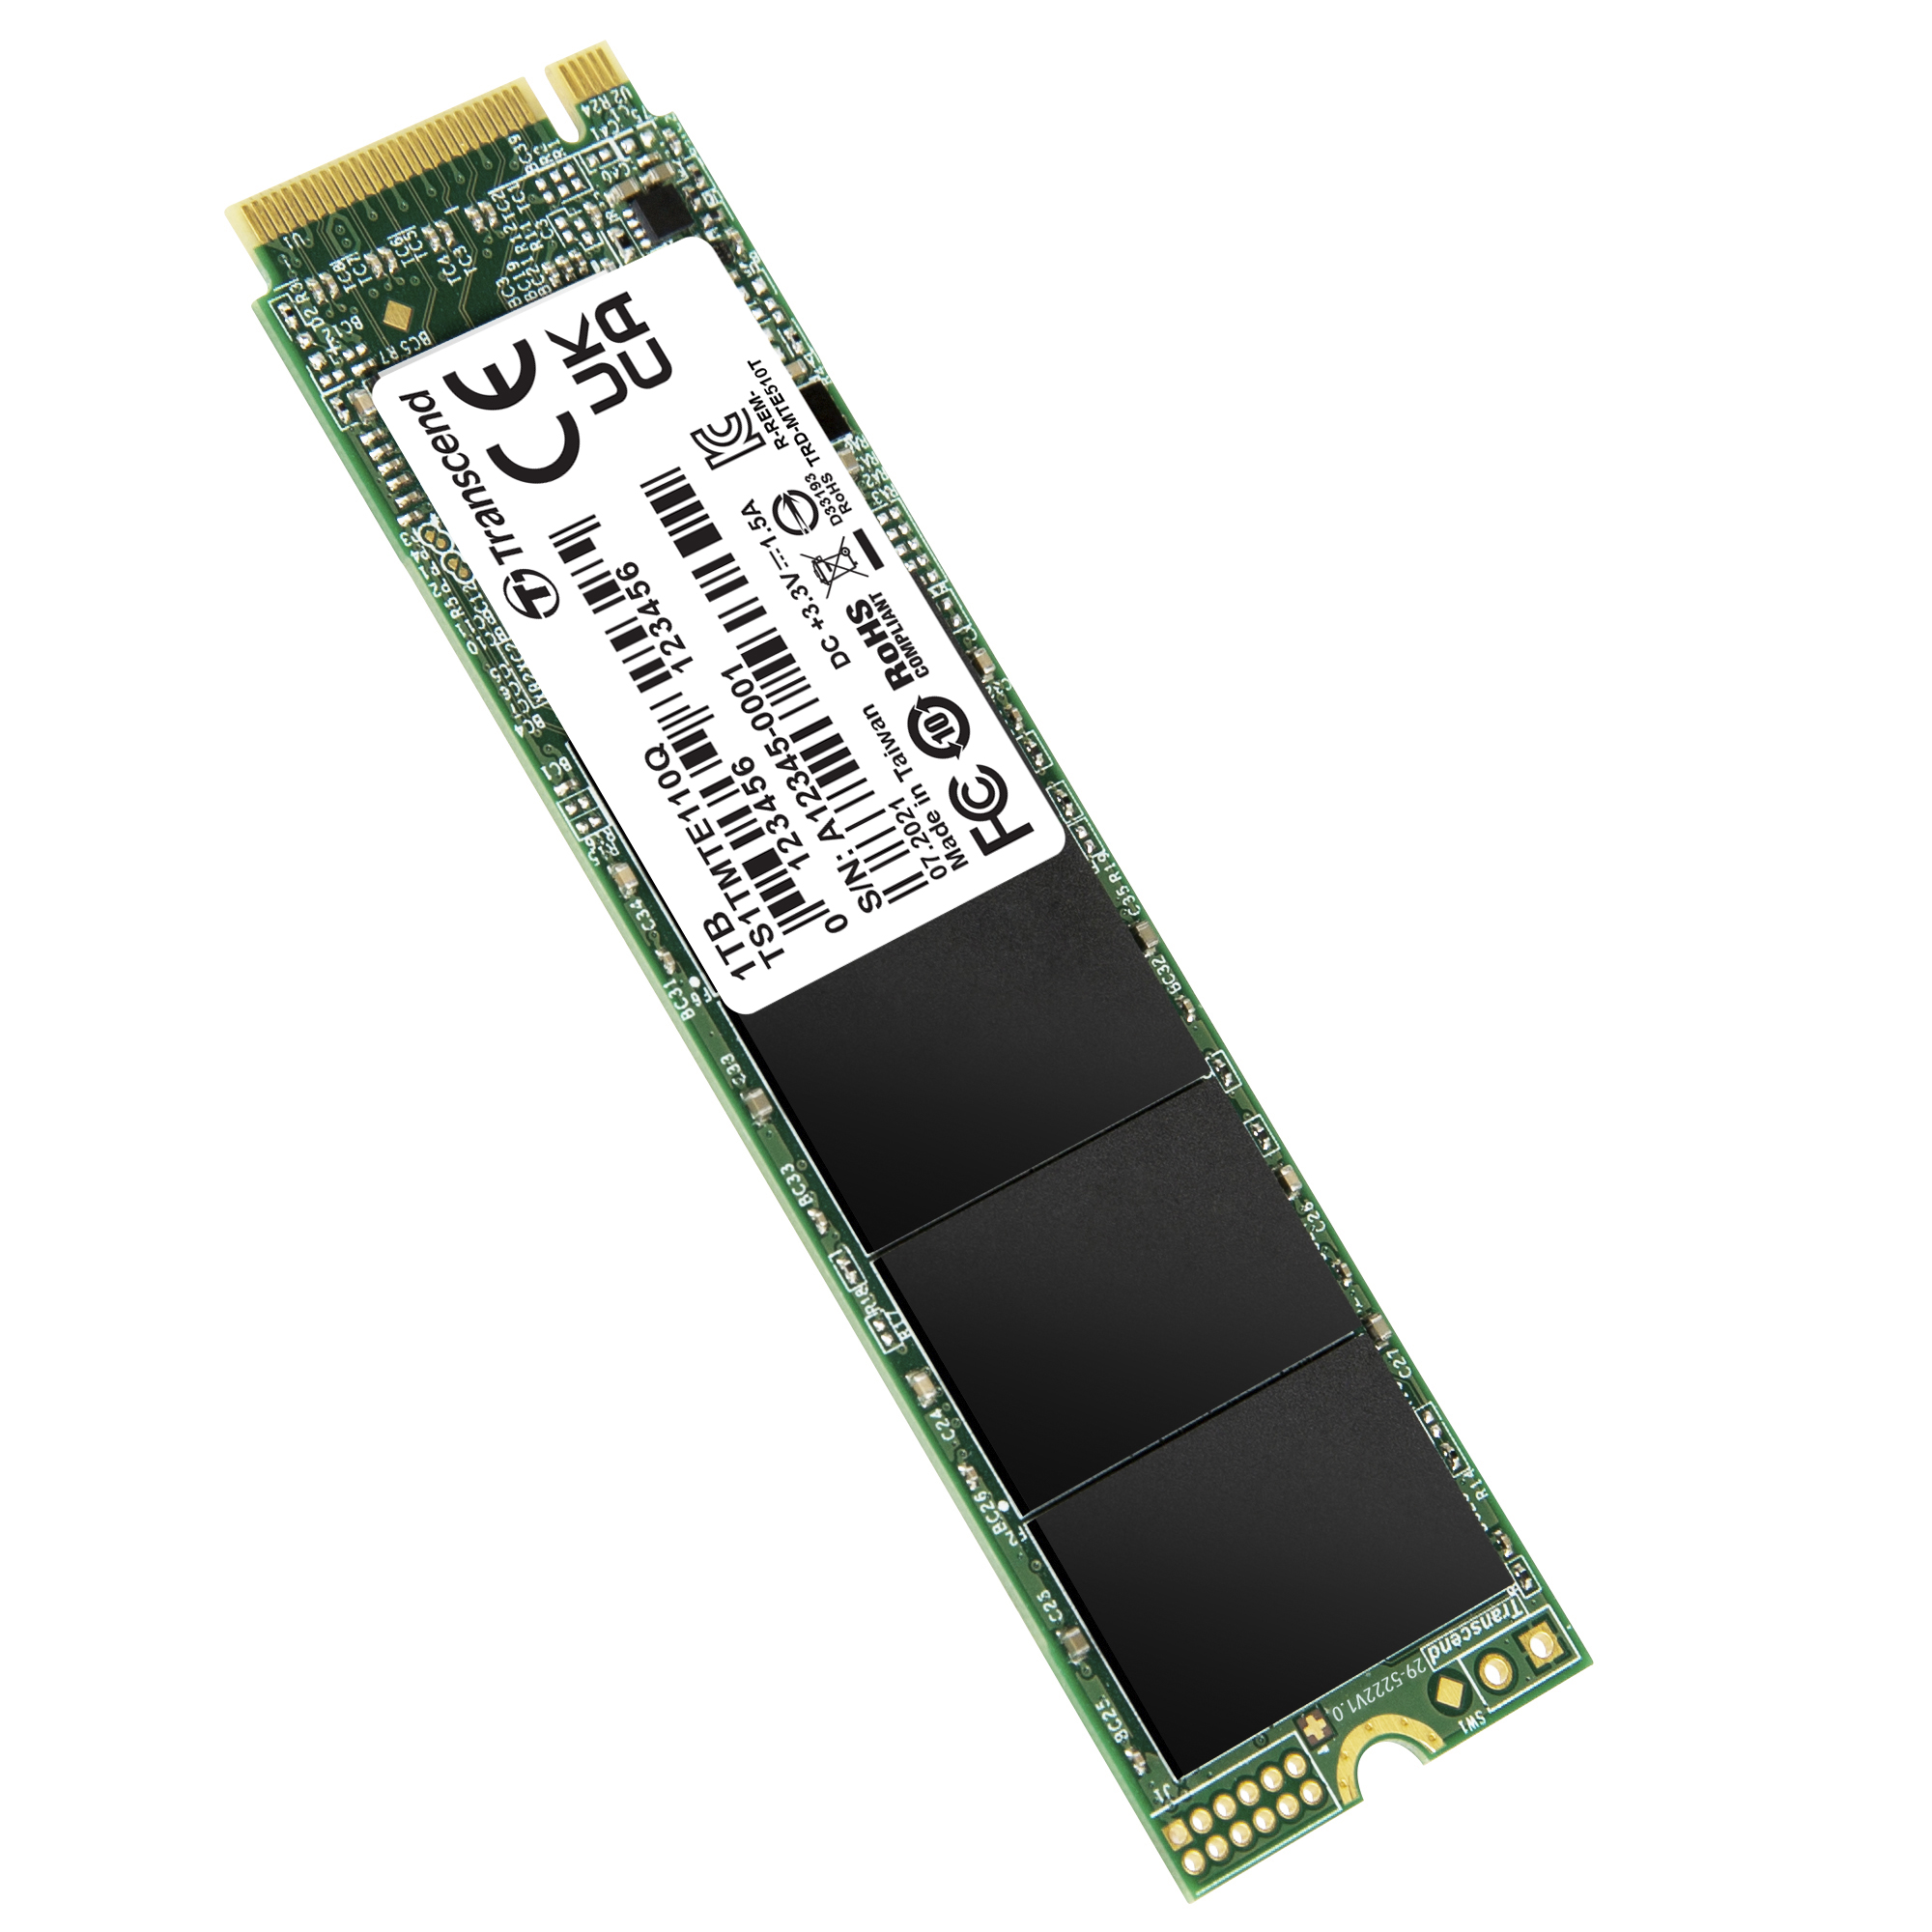 PCIe SSD 110Q M.2 Solid State Drive 